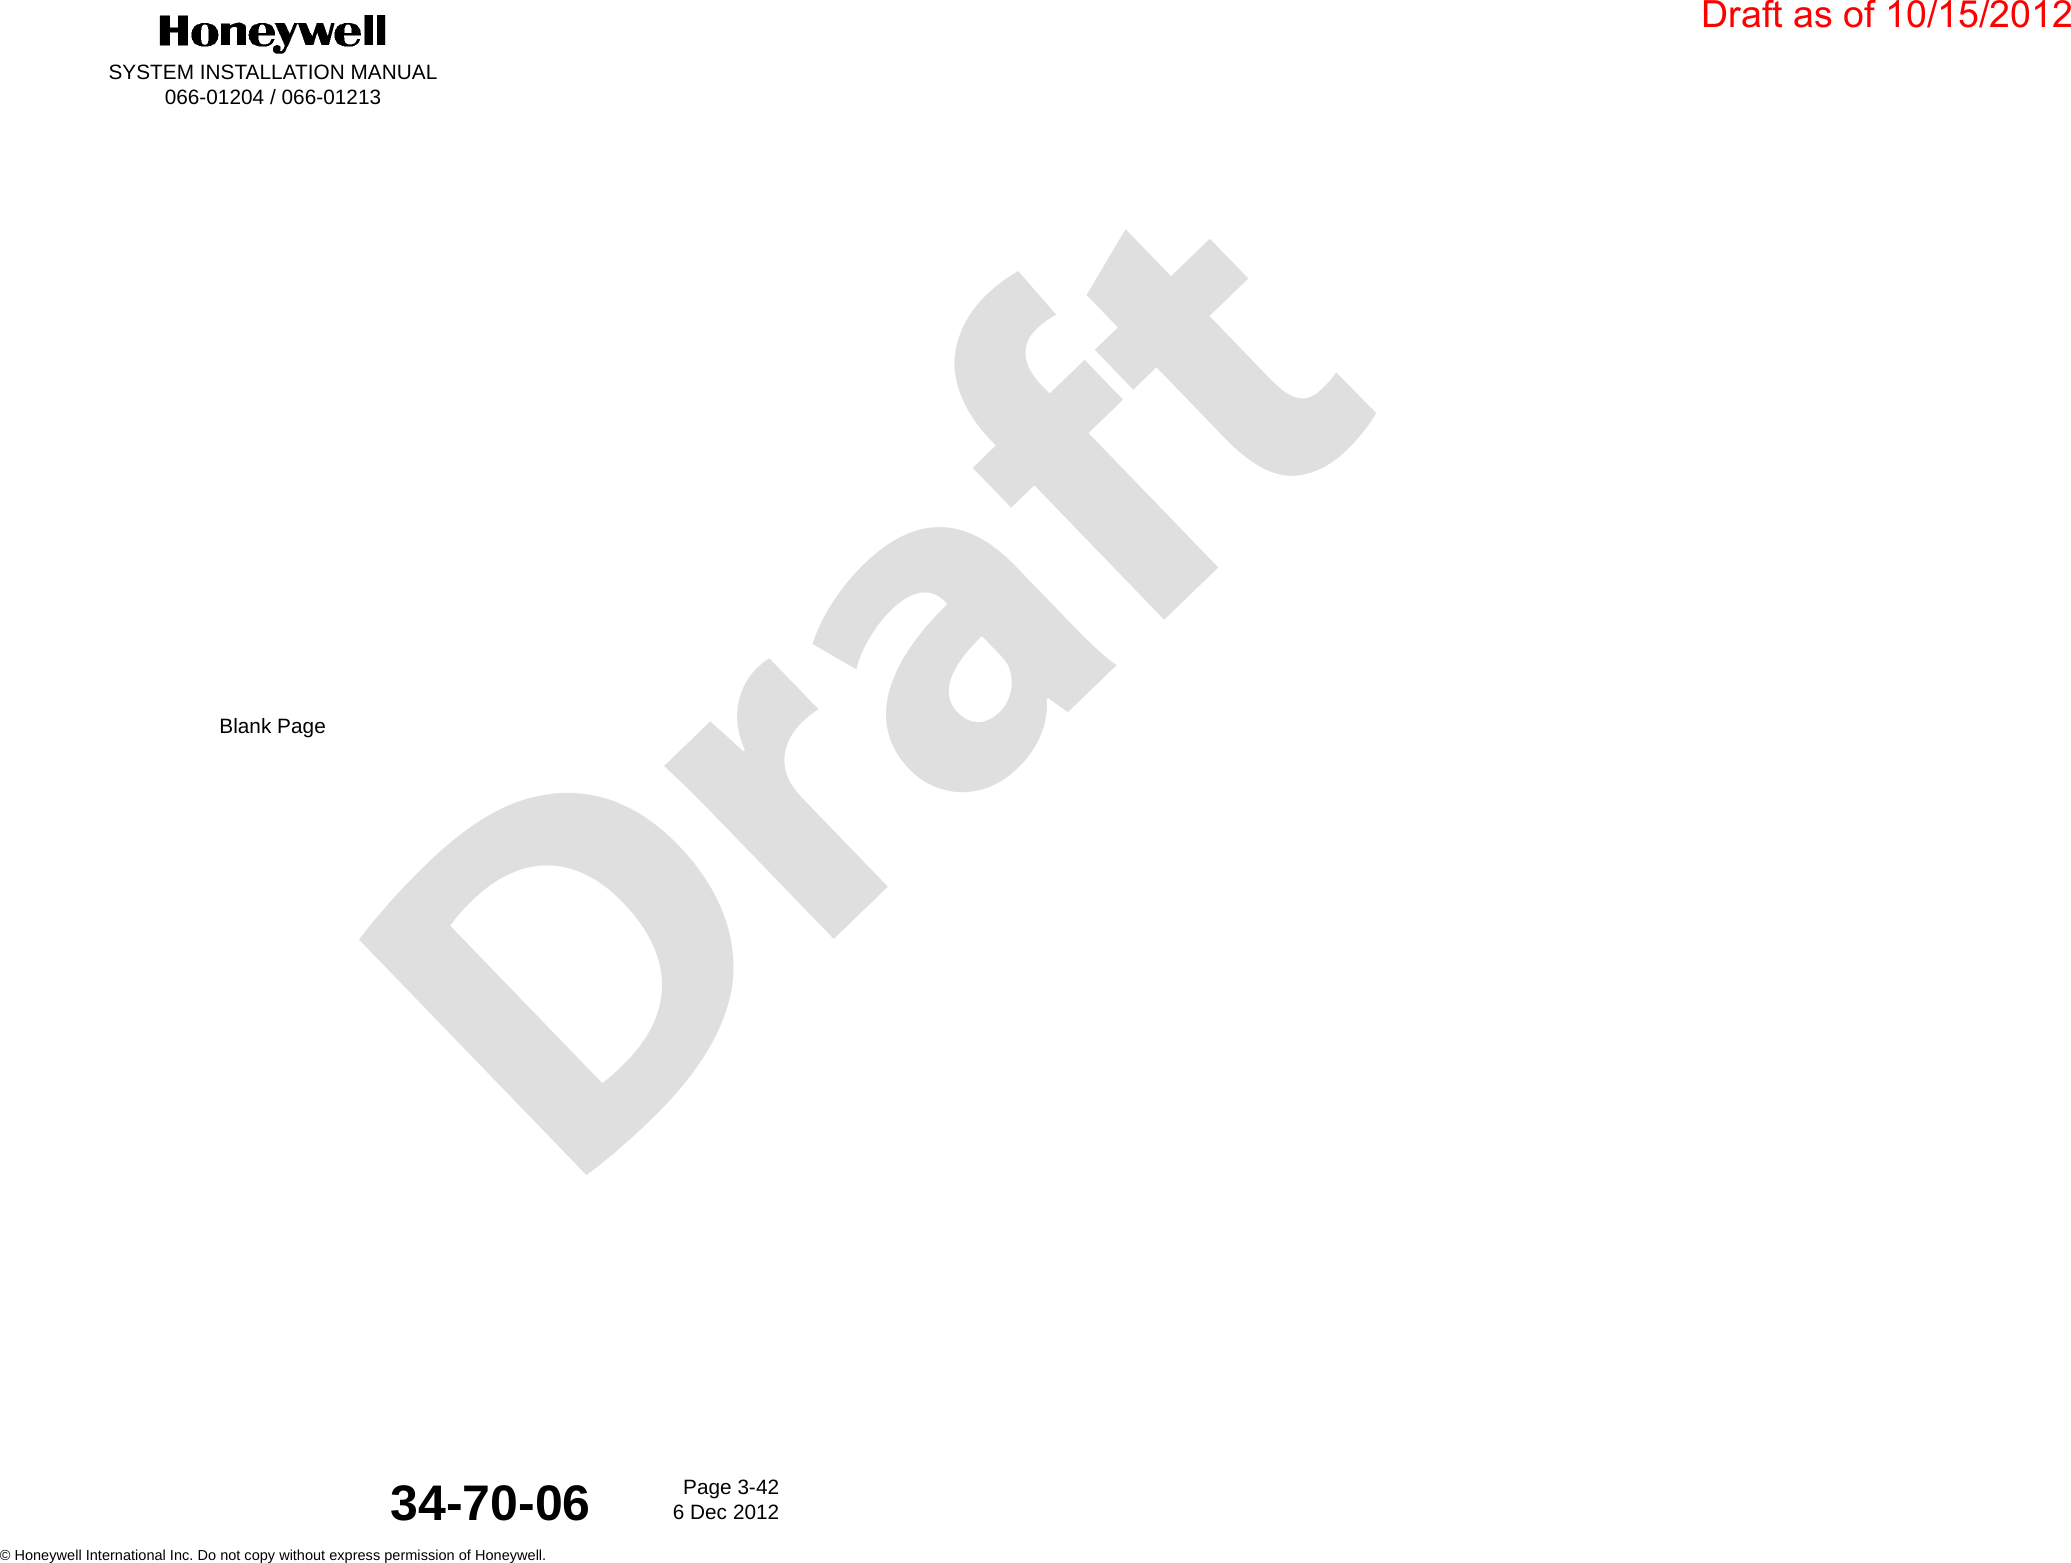 DraftSYSTEM INSTALLATION MANUAL066-01204 / 066-01213Page 3-426 Dec 2012© Honeywell International Inc. Do not copy without express permission of Honeywell.34-70-06Blank PageDraft as of 10/15/2012